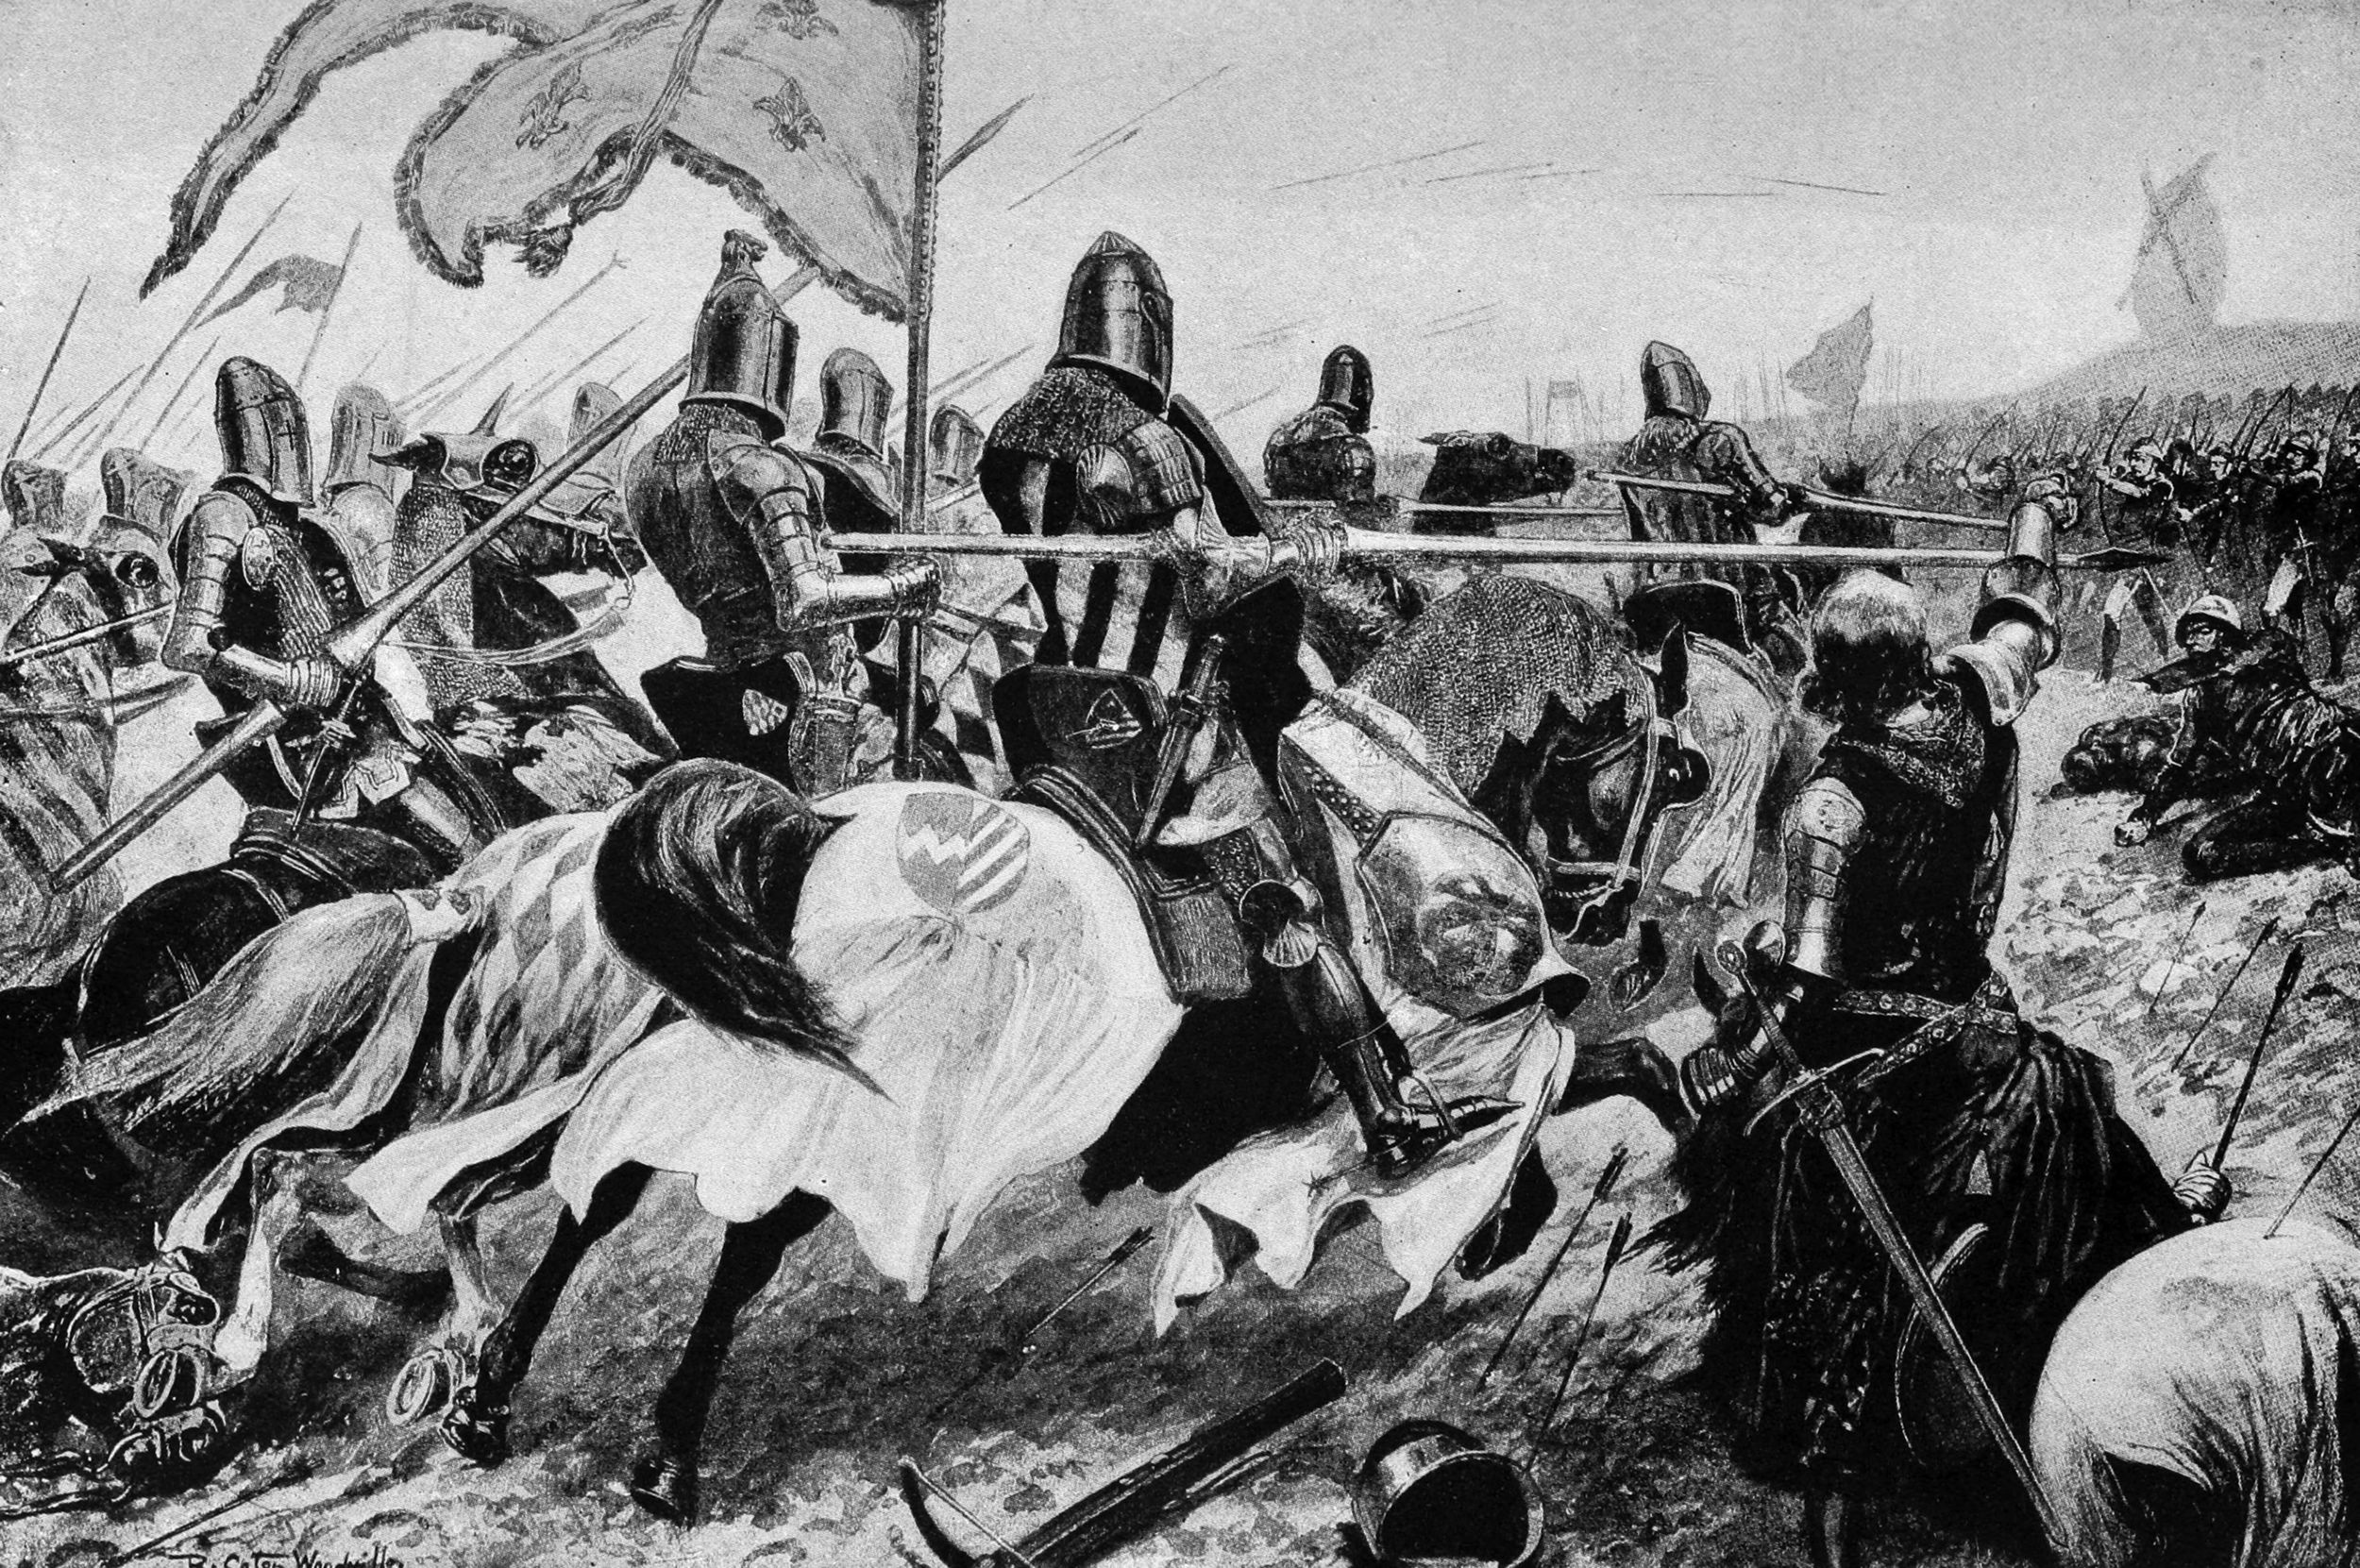 English King Edward III won a decisive victory over the French in 1346 at Crecy at the outset of the Hundred Years’ War with his dismounted knights and fearsome longbowmen